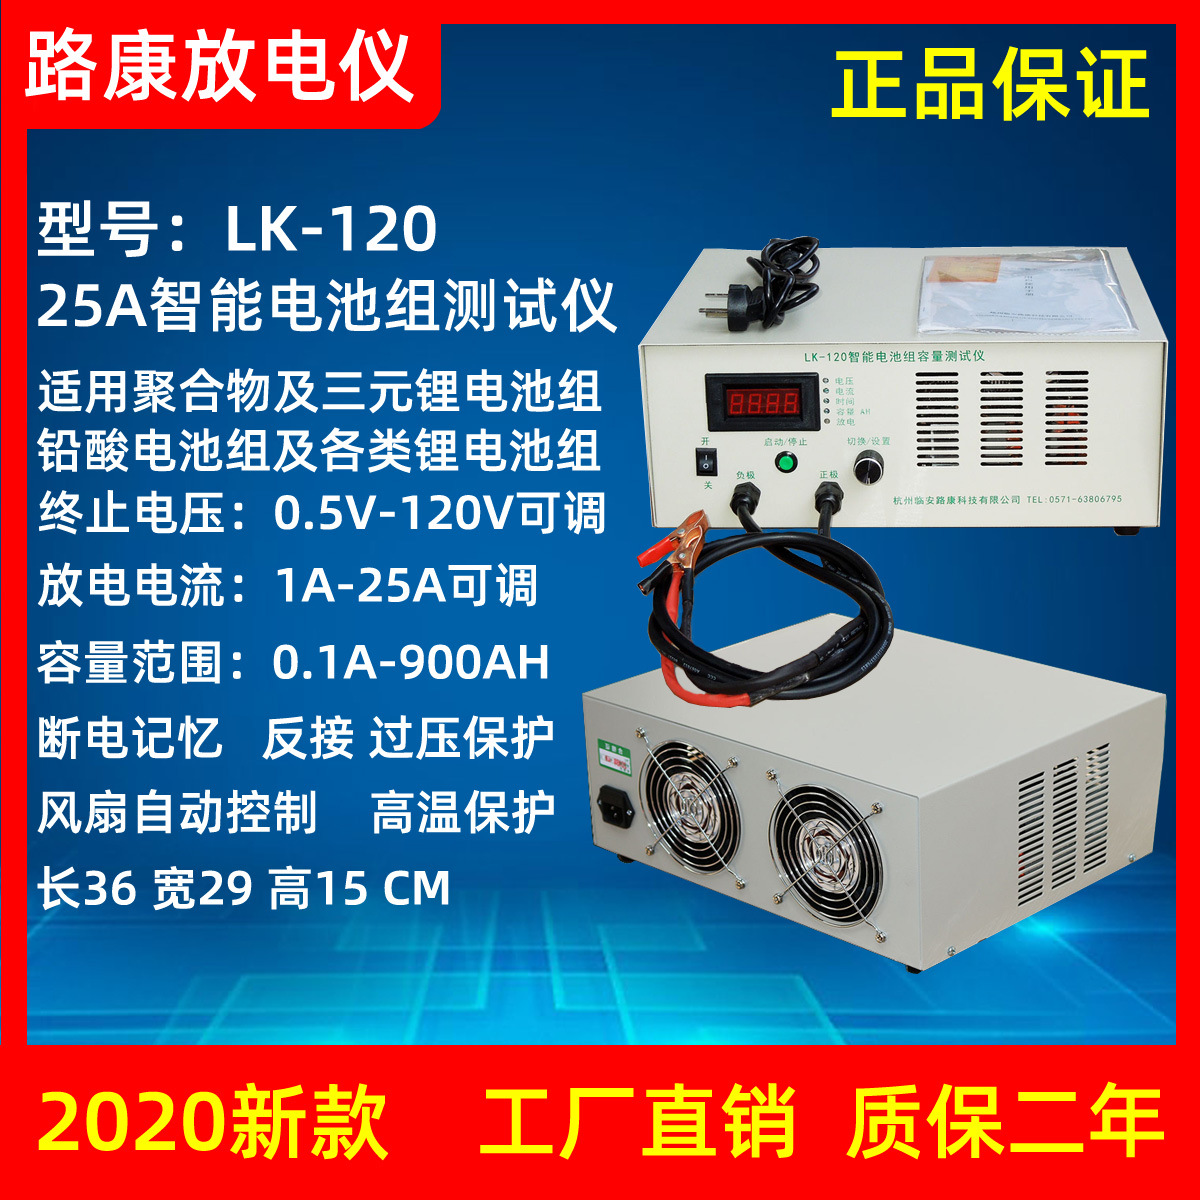 Lu Kang LK-120 Discharge instrument 25A Series connection lithium battery 0.5V-120V Battery capacity test Tester